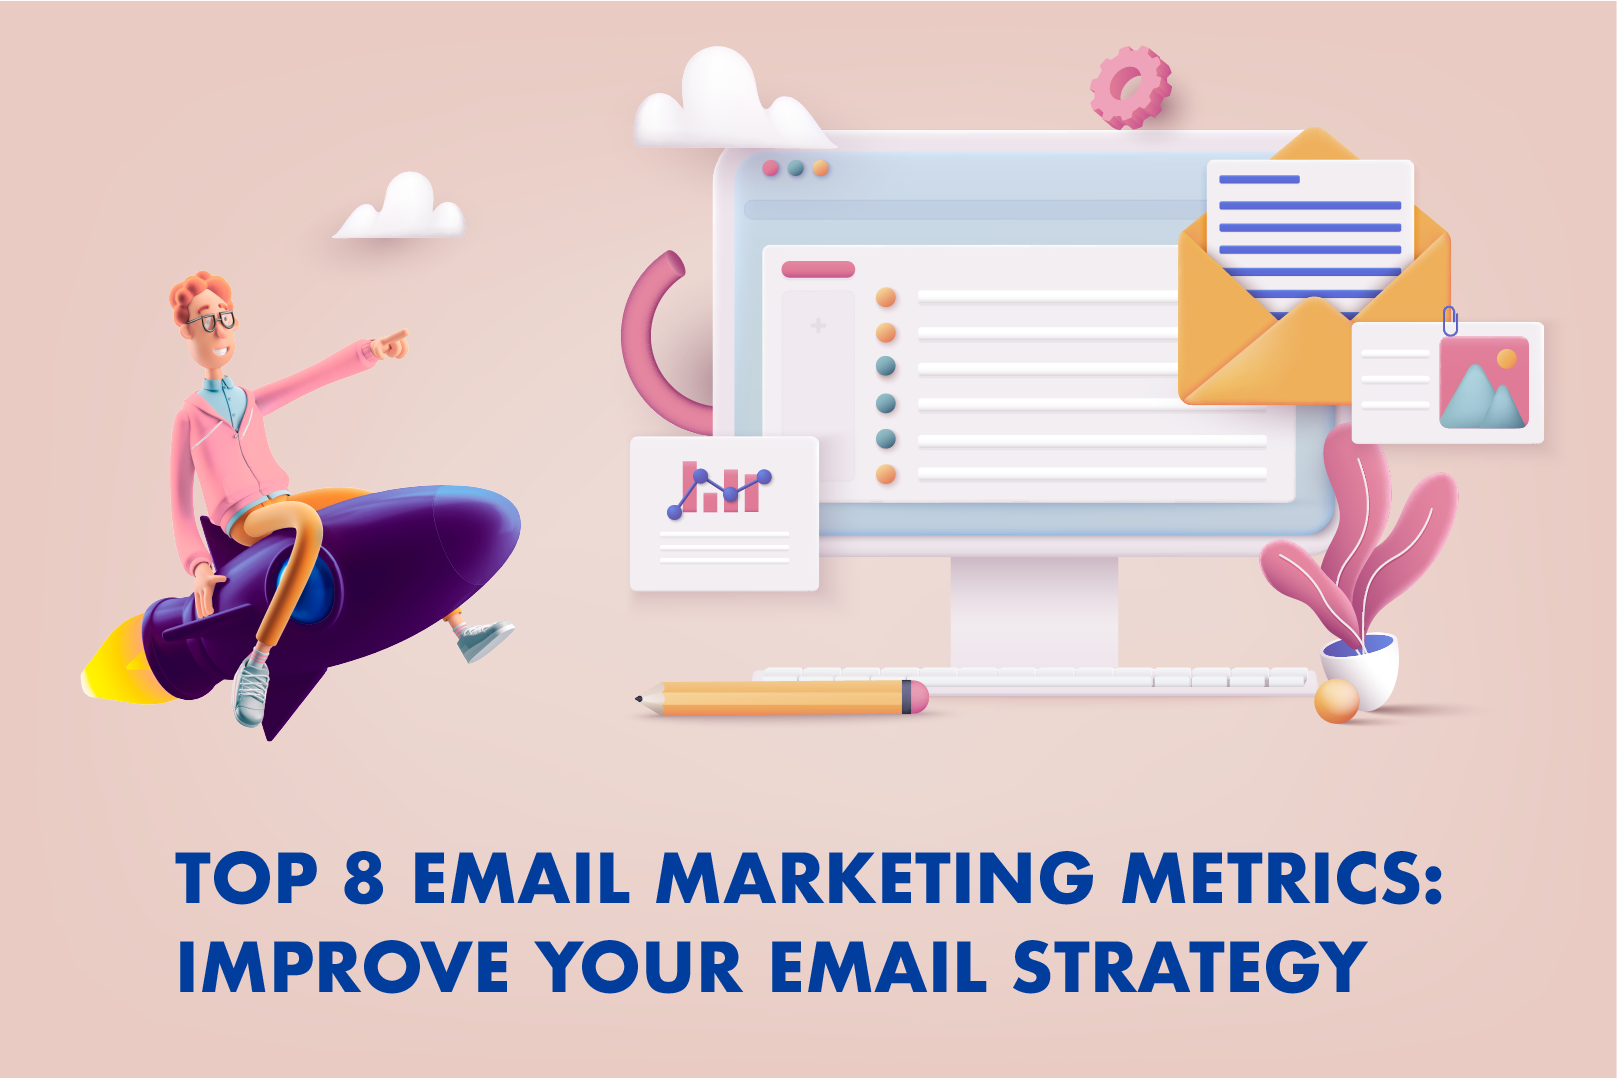 Top 8 Email Marketing Metrics: Improve Your Email Strategy